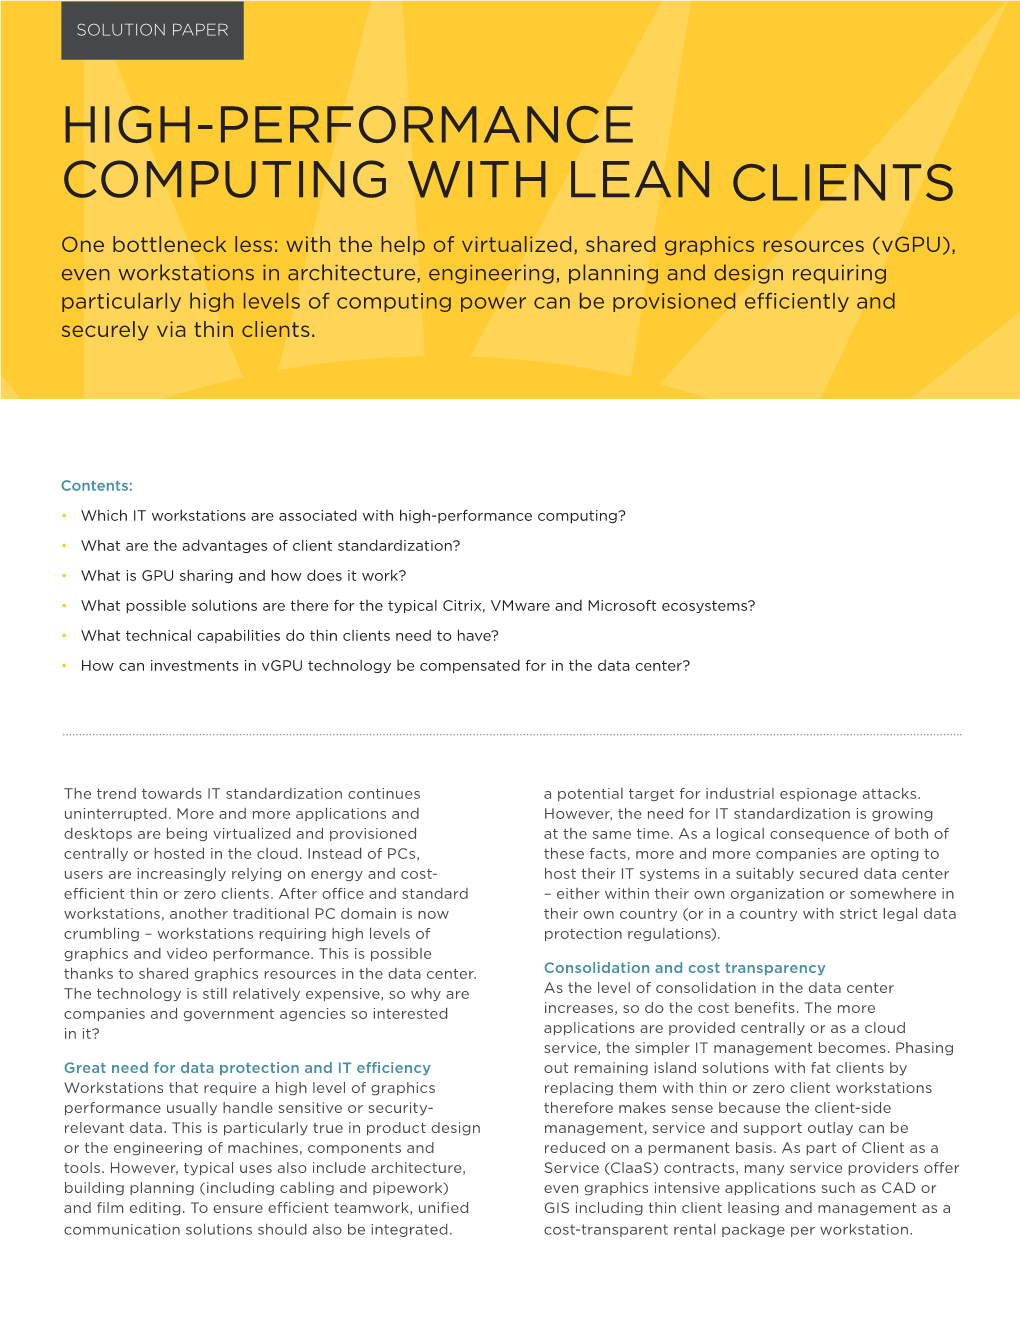 High-Performance Computing with Lean Clients